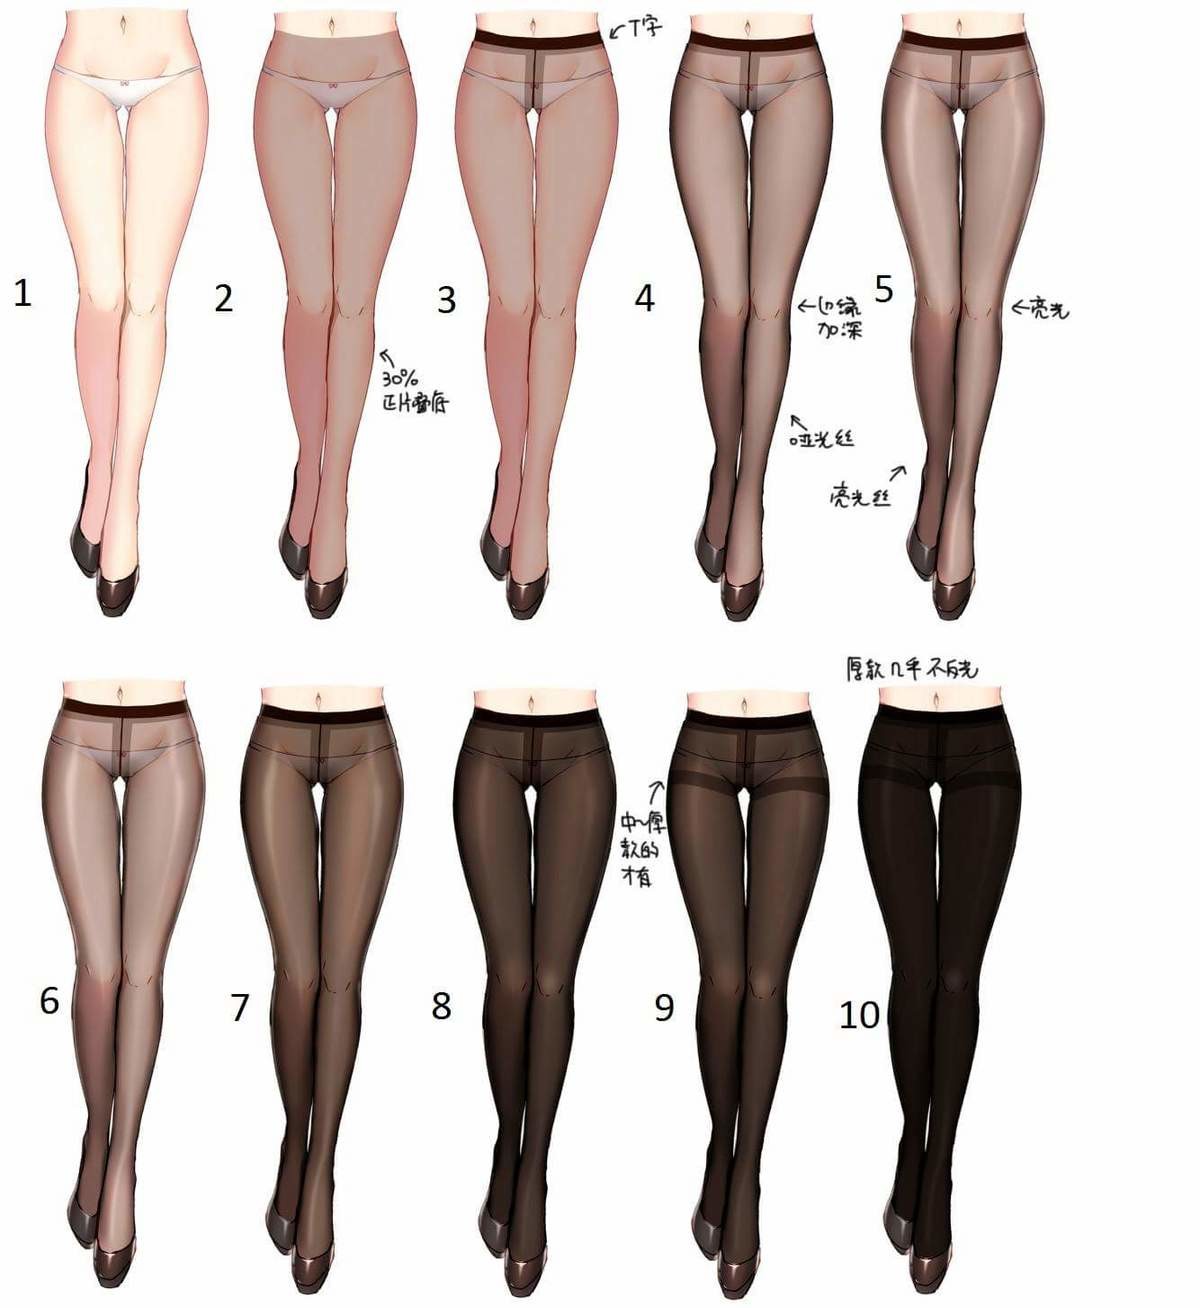 Lifes too short to wear pantyhose